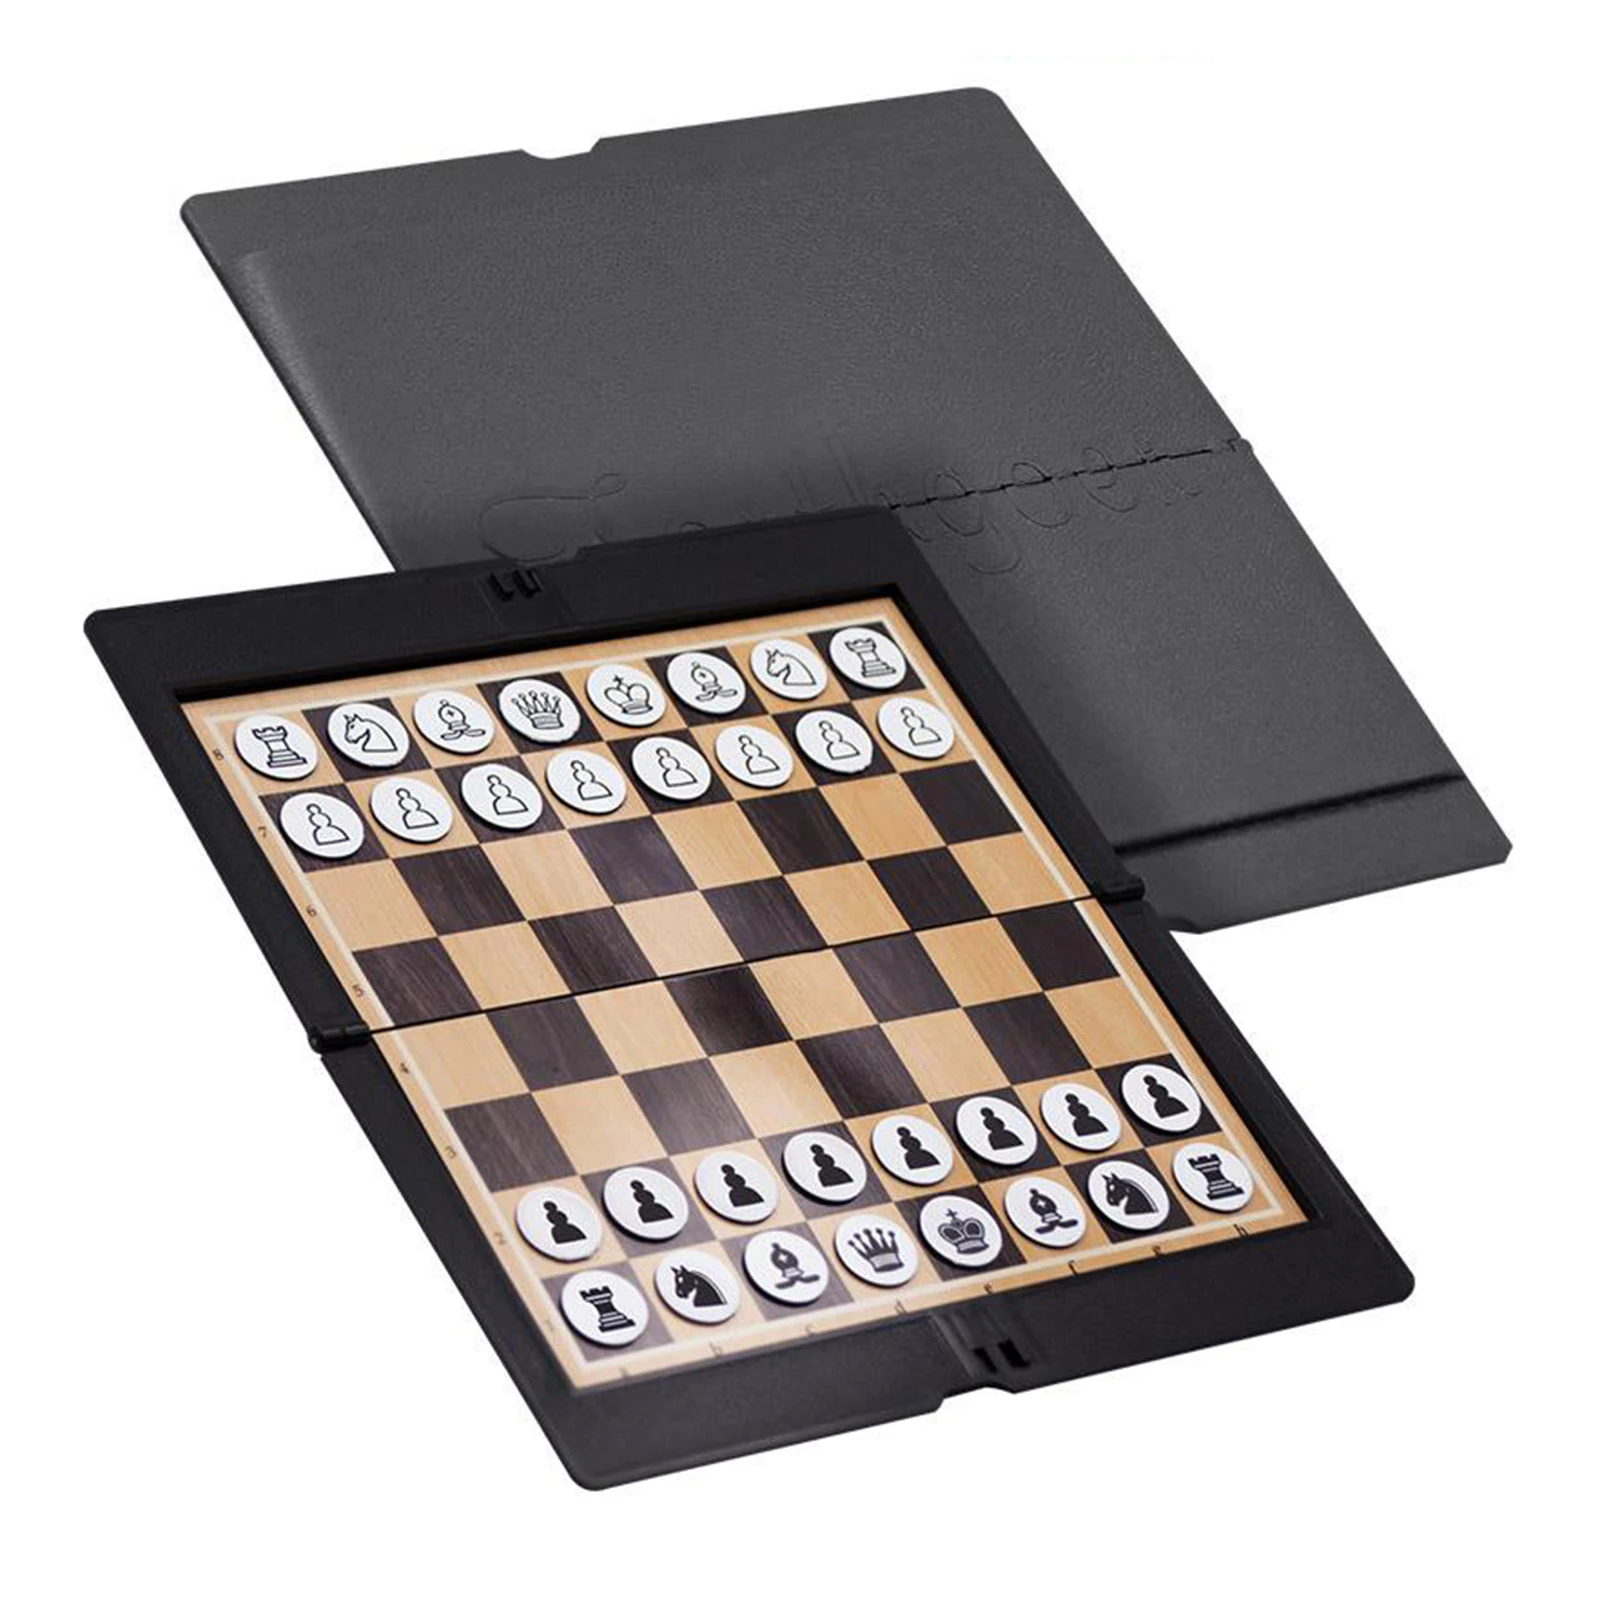 Magnetic folding chess board portable indoor game sport camping travel UK NEW 